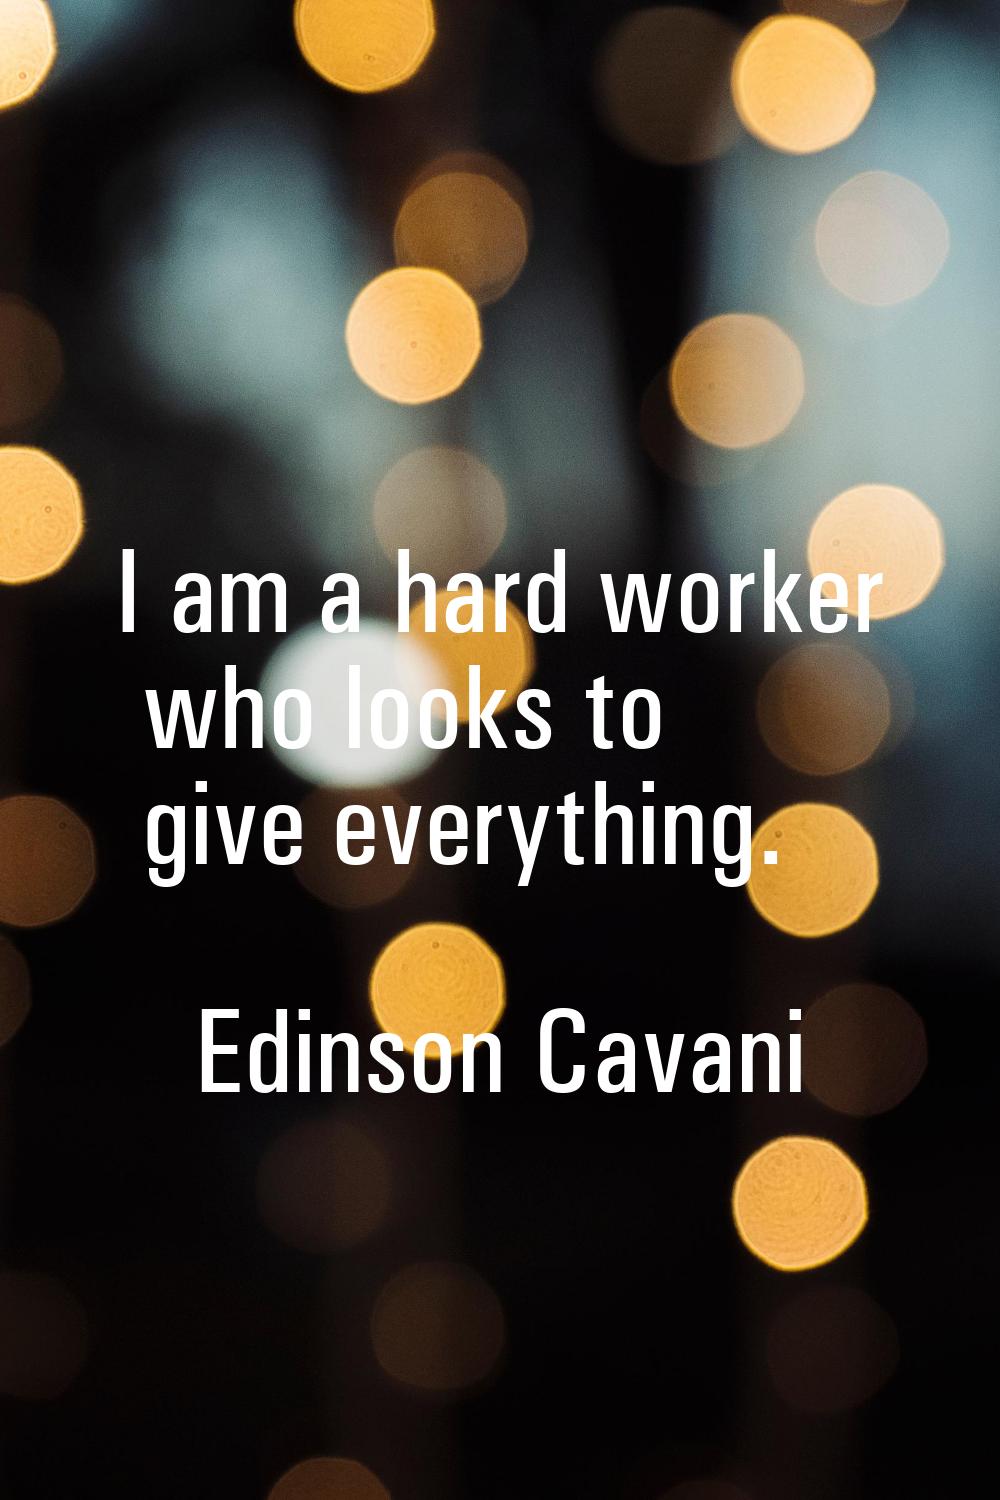 I am a hard worker who looks to give everything.